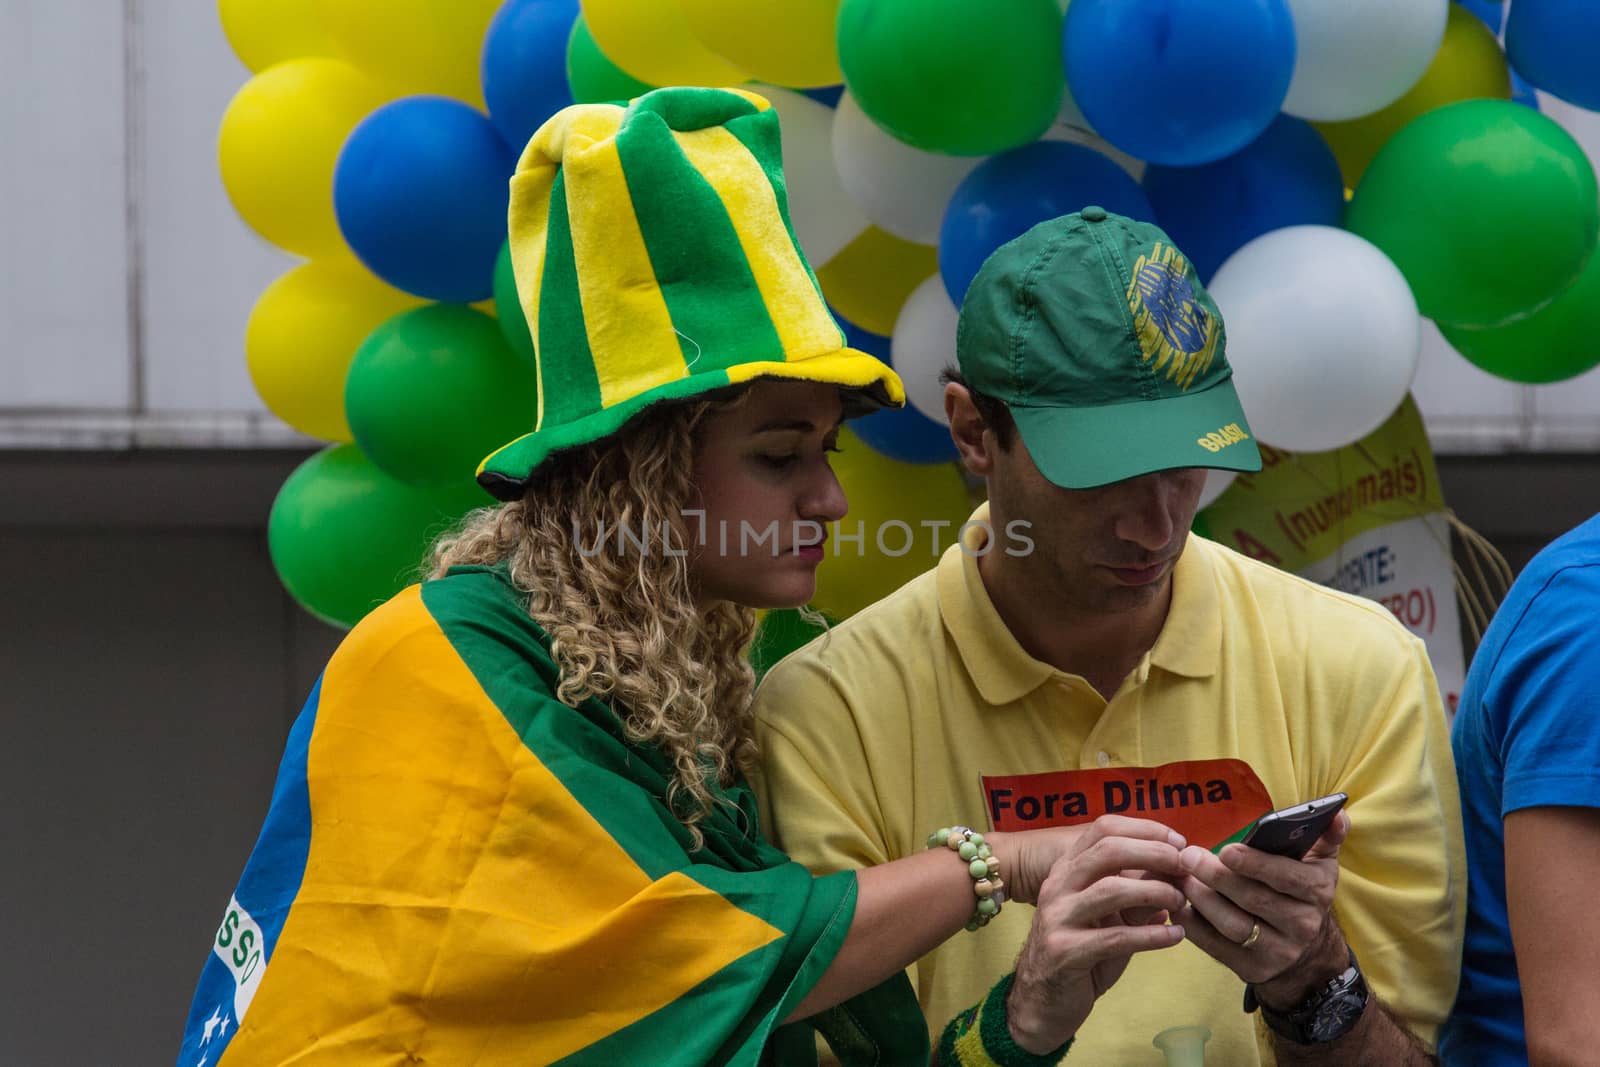 Sao Paulo Brazil March 13, 2016: One unidentified couple in the biggest protest against federal government corruption in Sao Paulo.